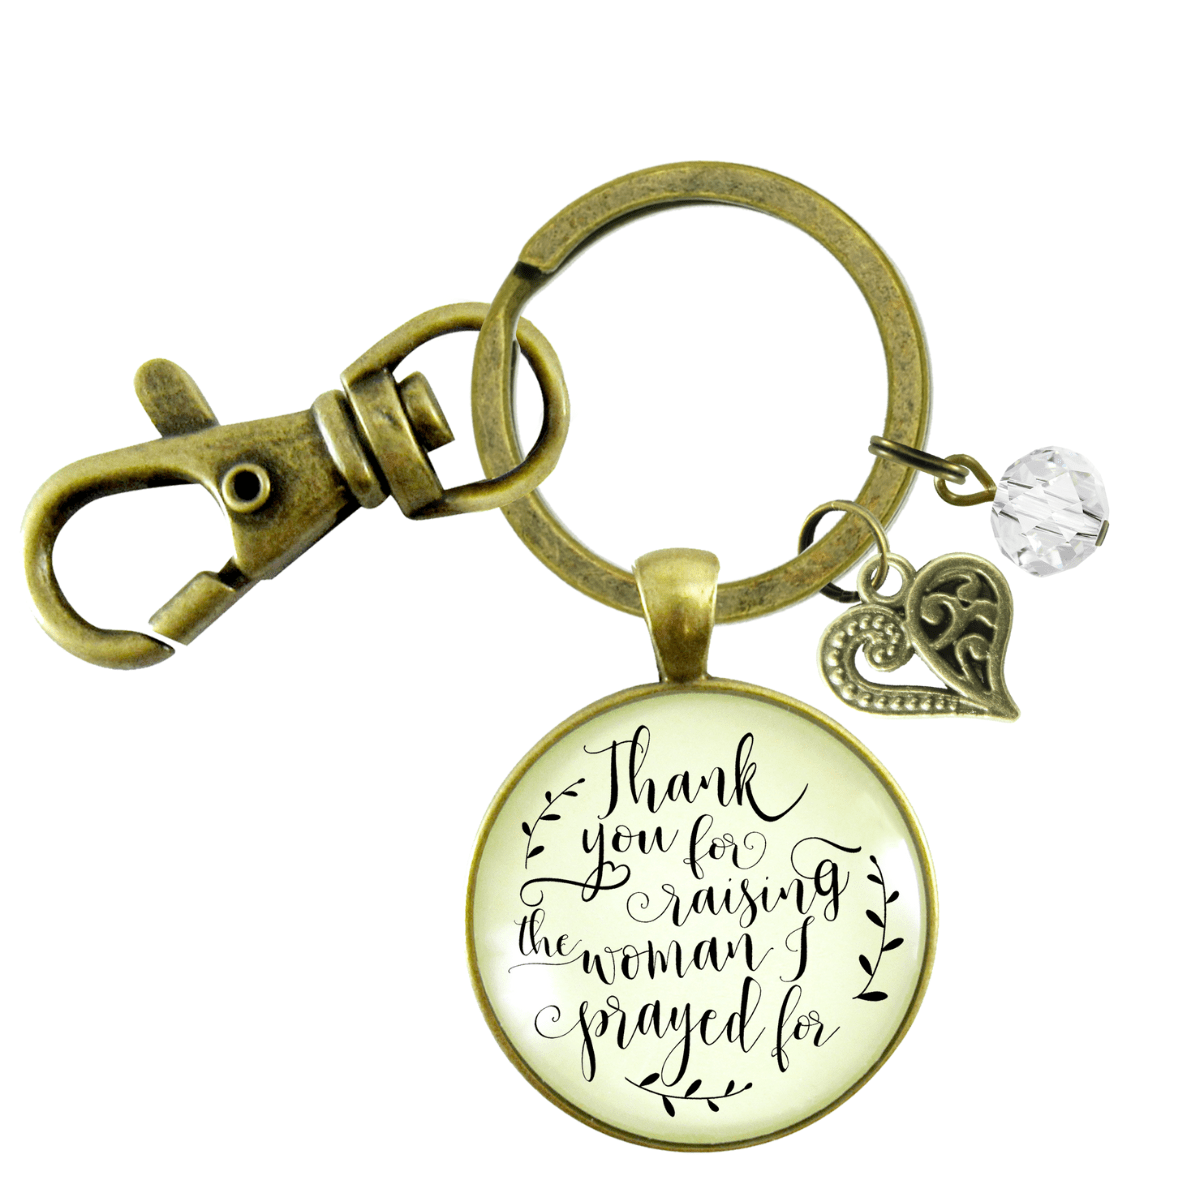 To His Mother In Law Keychain Thank You For Raising The Woman I Prayed For Wedding Gift From Groom - Gutsy Goodness